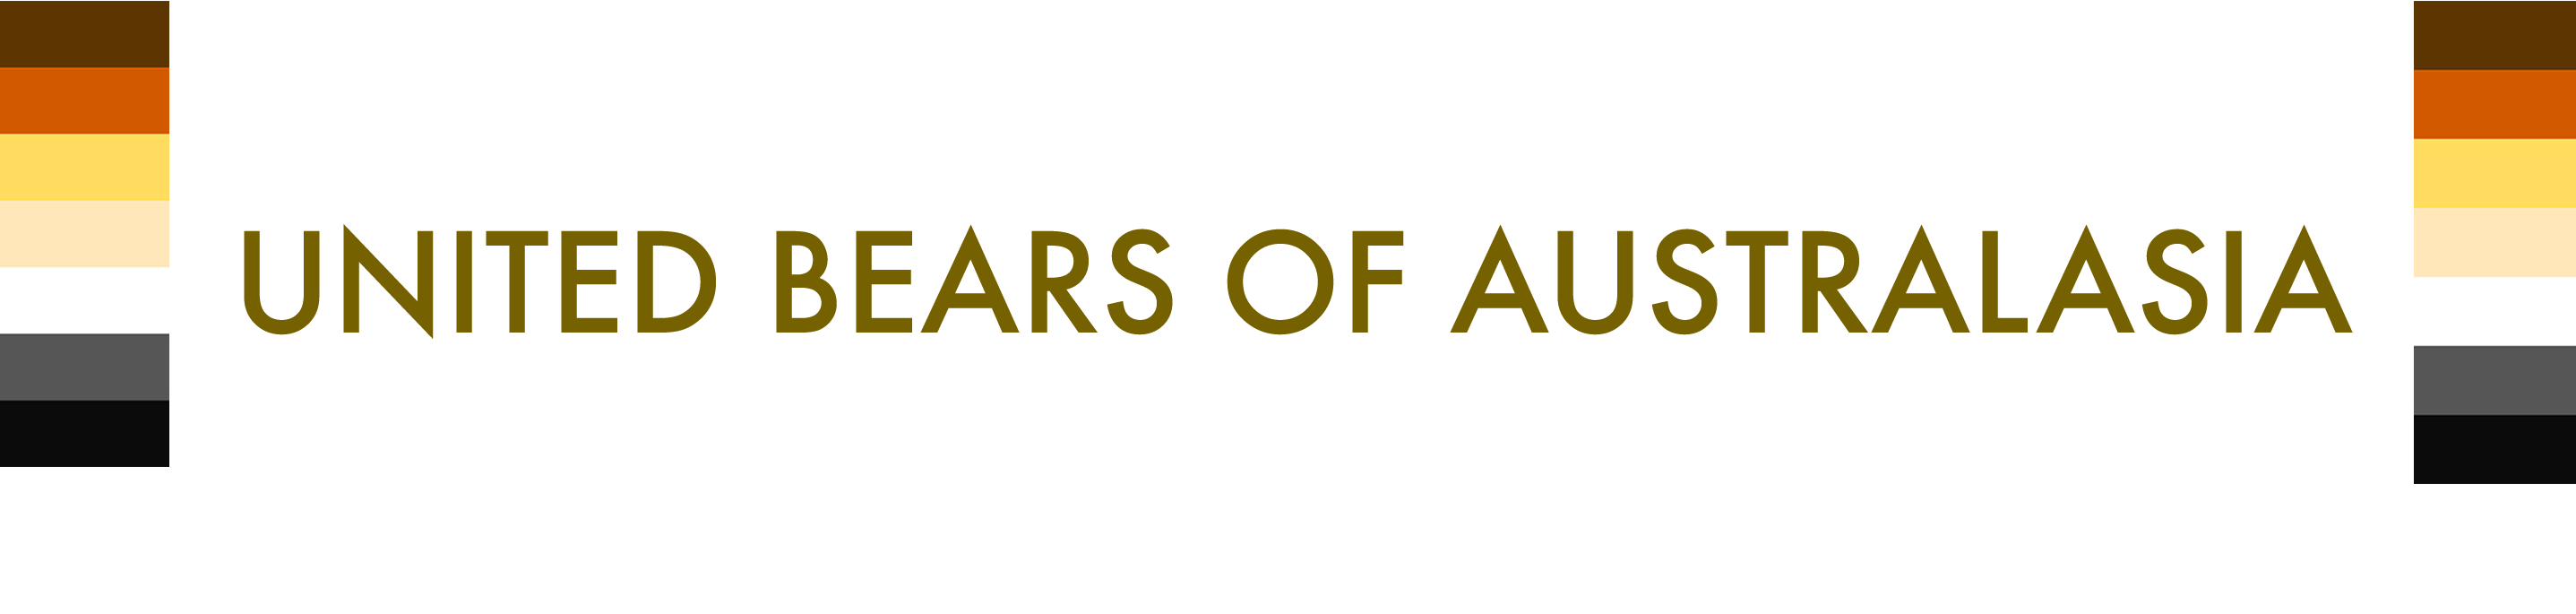 Bear Essentials 27, United Bears of Australasia, 19 February to 5 March 2023, 23 Events, Various Venues, Sydney, Australia